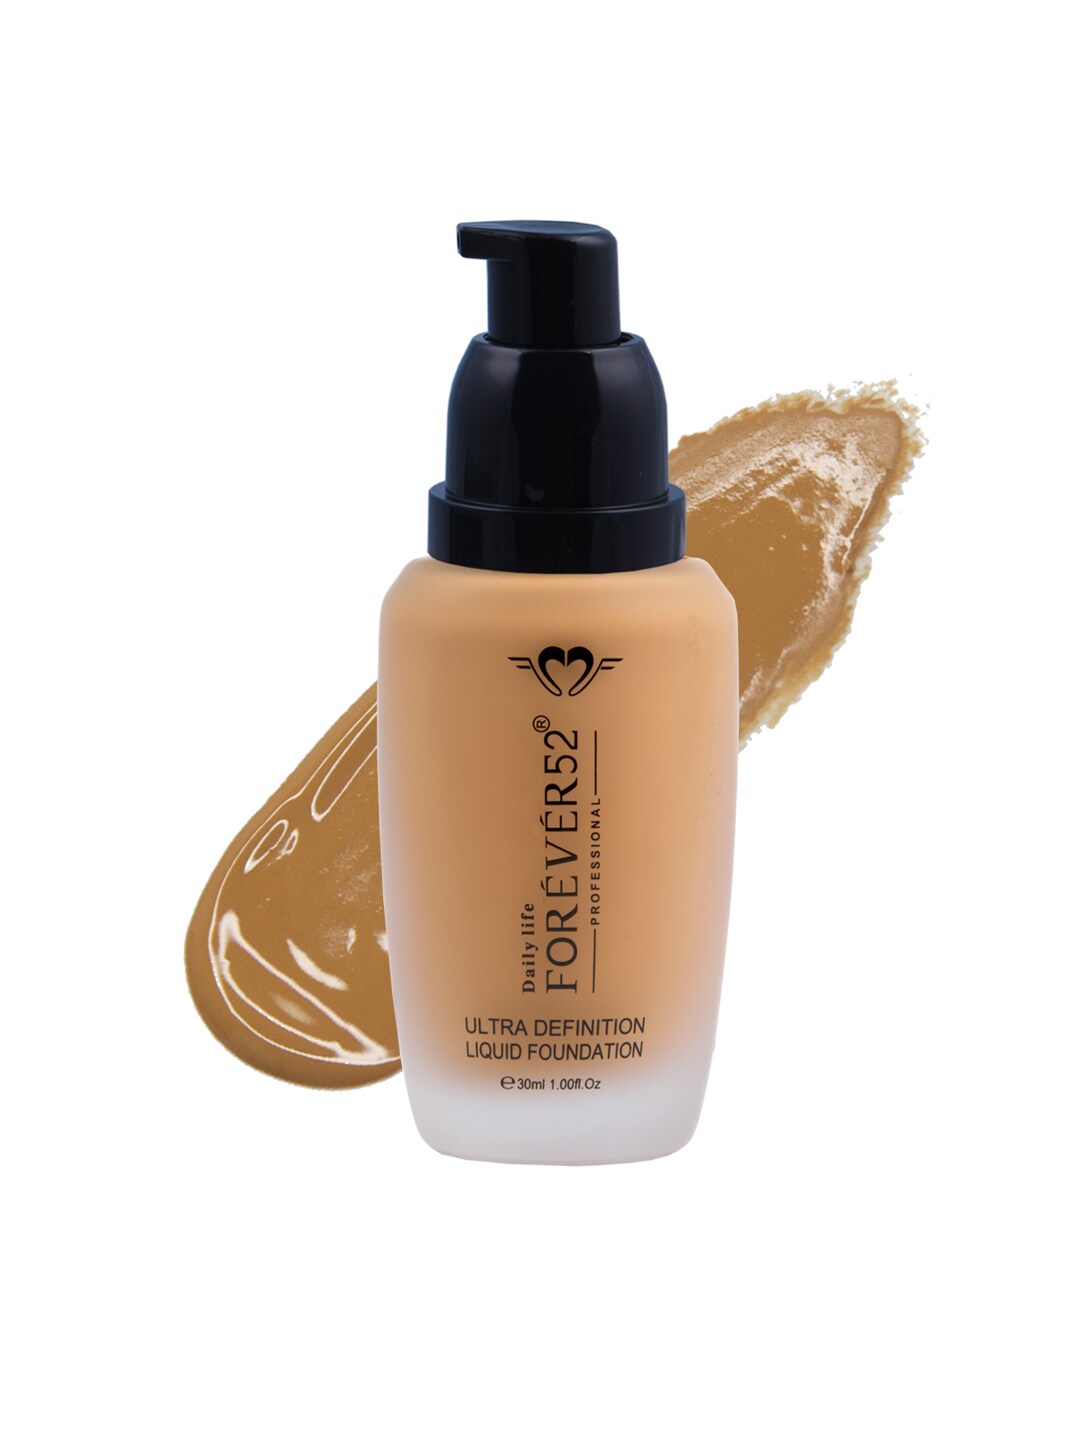 Daily Life Forever52 Ultra Definition Liquid Foundation - Beige Caramel 30 ml Price in India